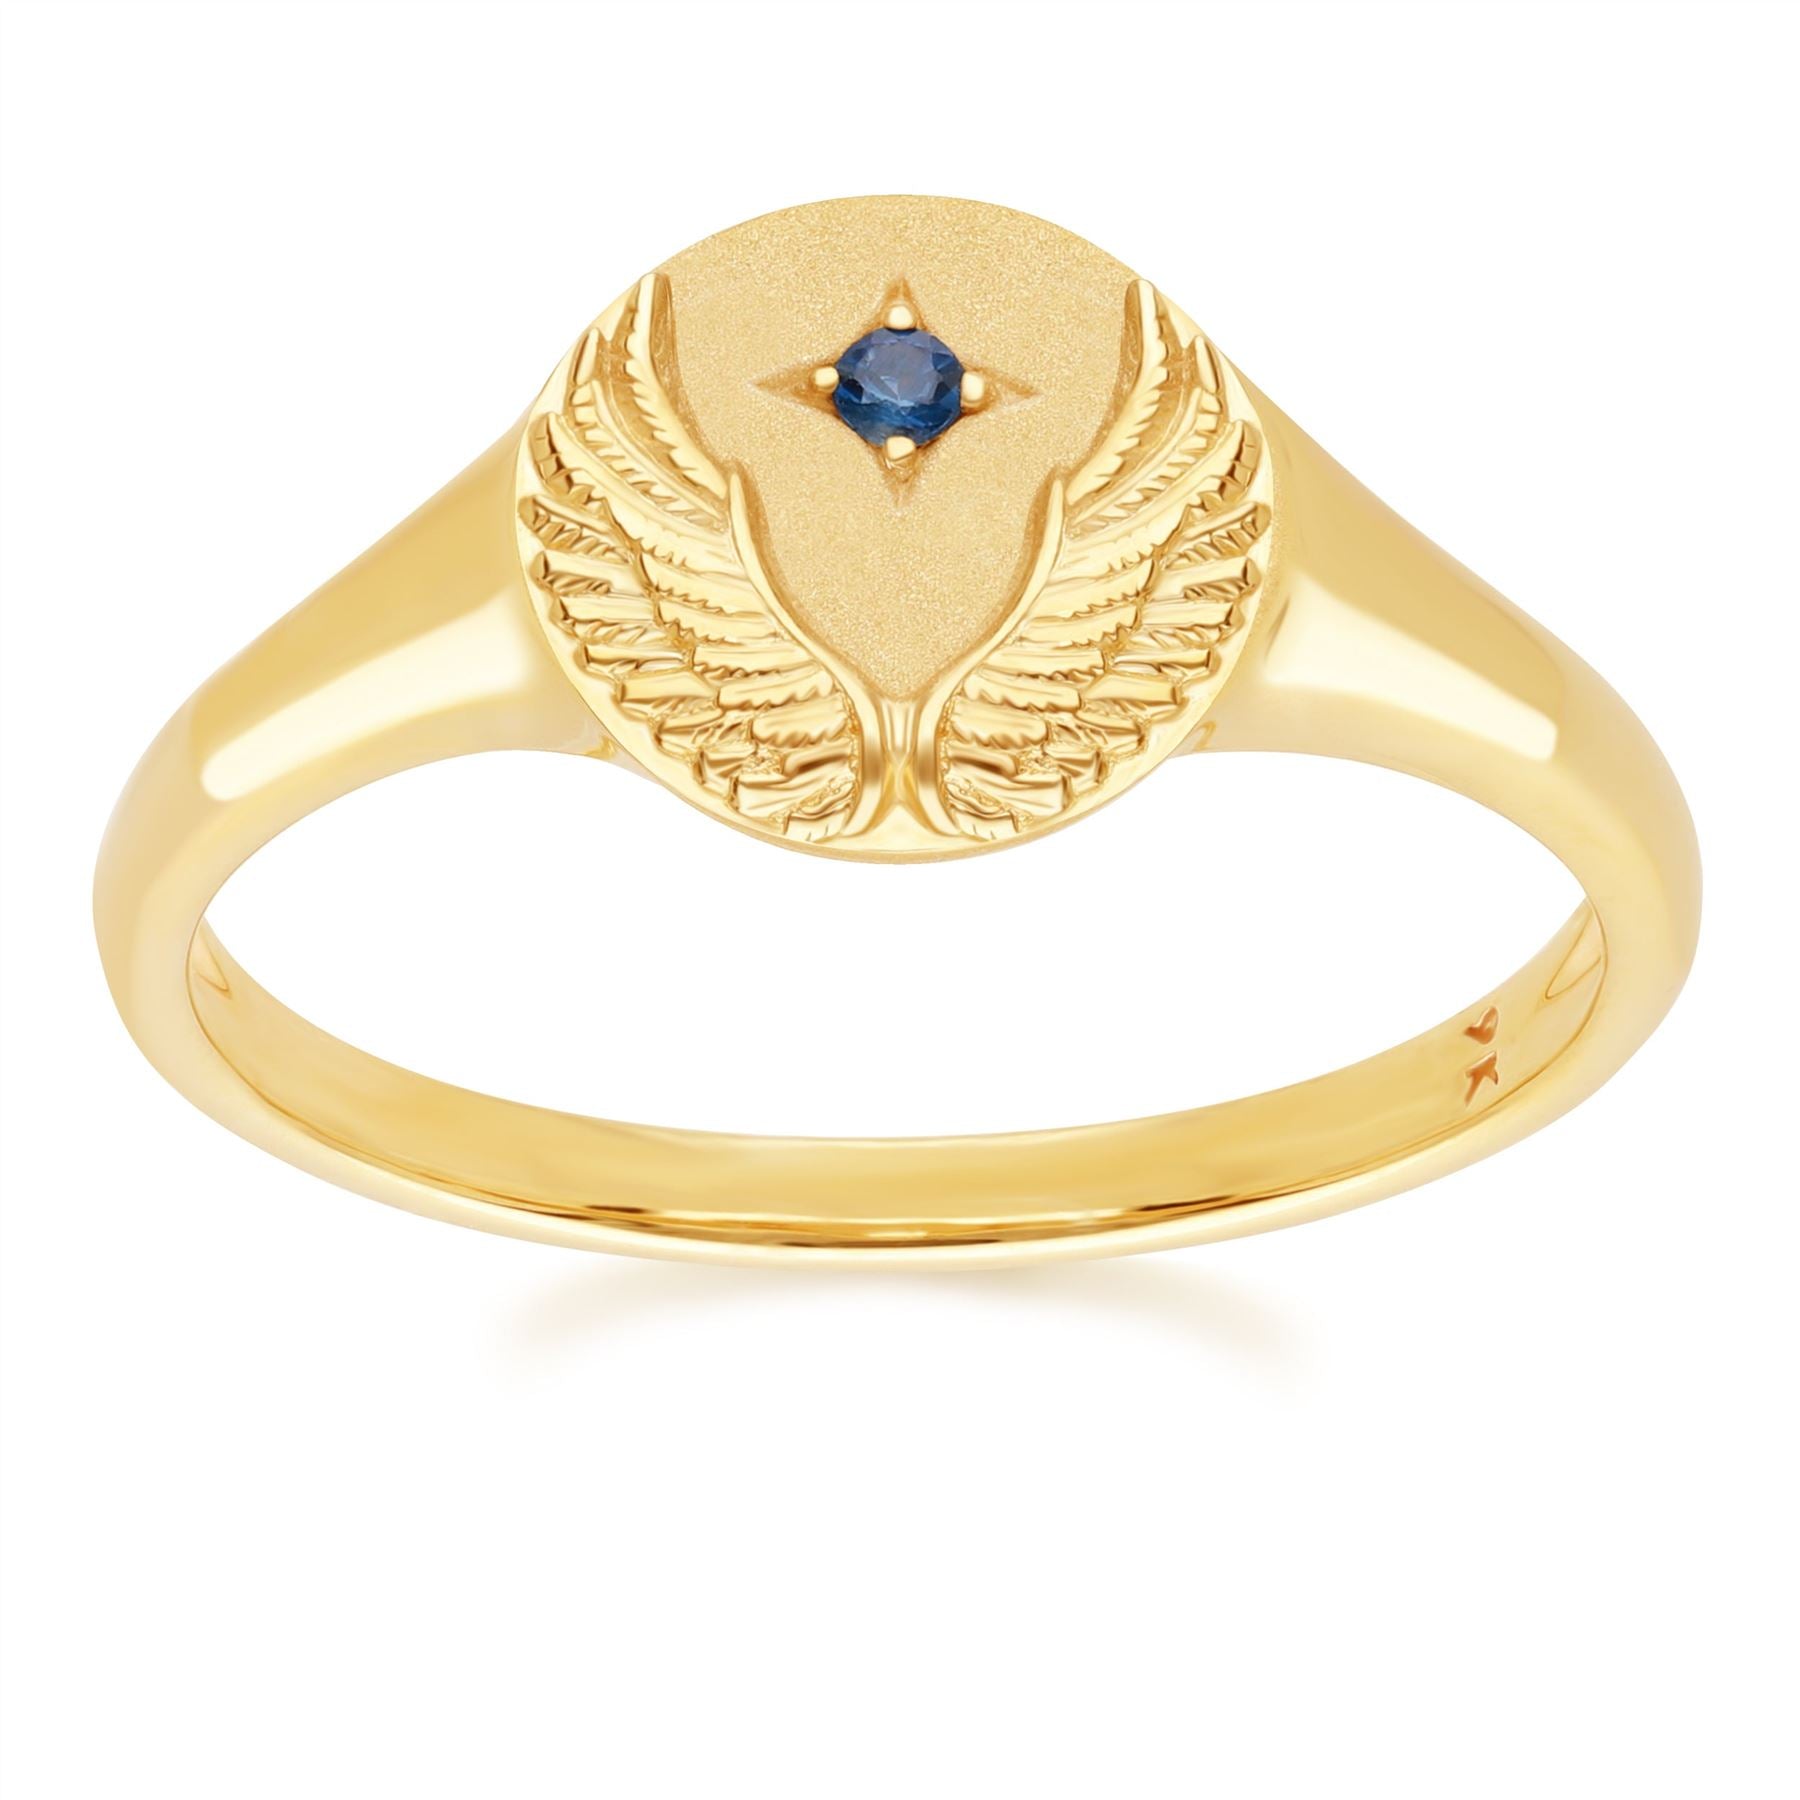 Zodiac Sign Virgo Signet Ring with Sapphire In 9ct Yellow GoldFront  135R2086019